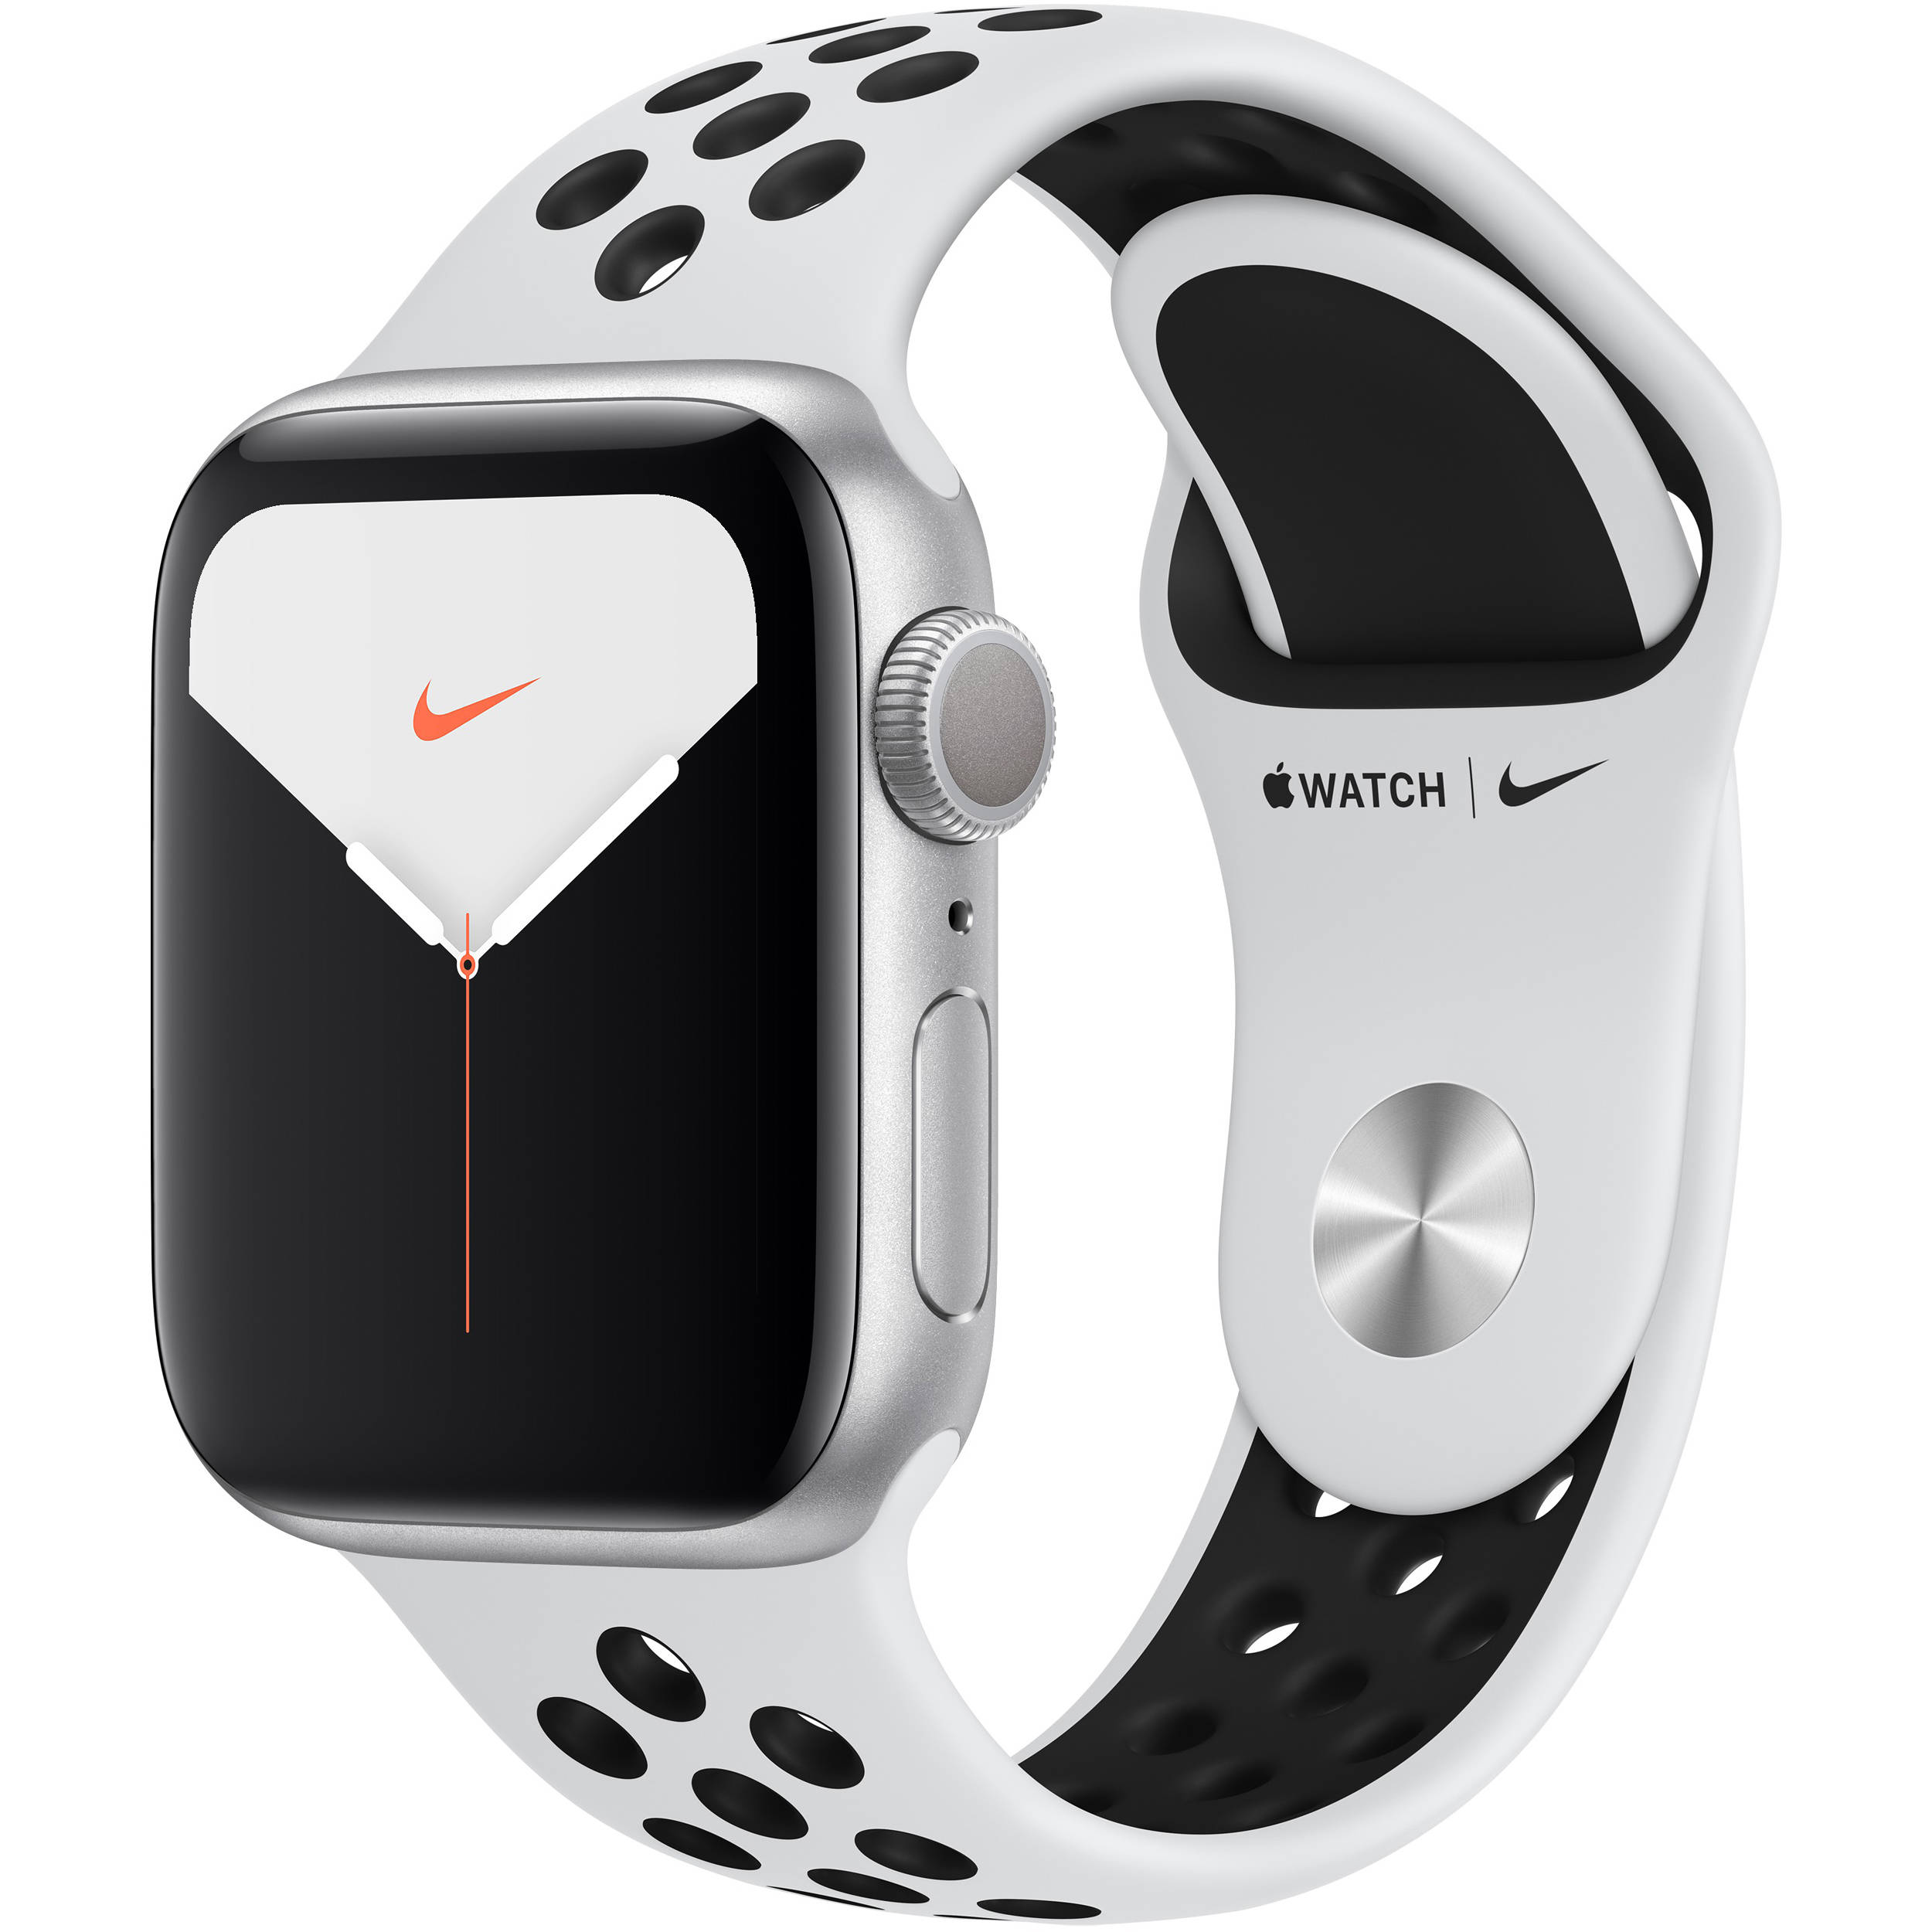 apple nike watch series 5 features